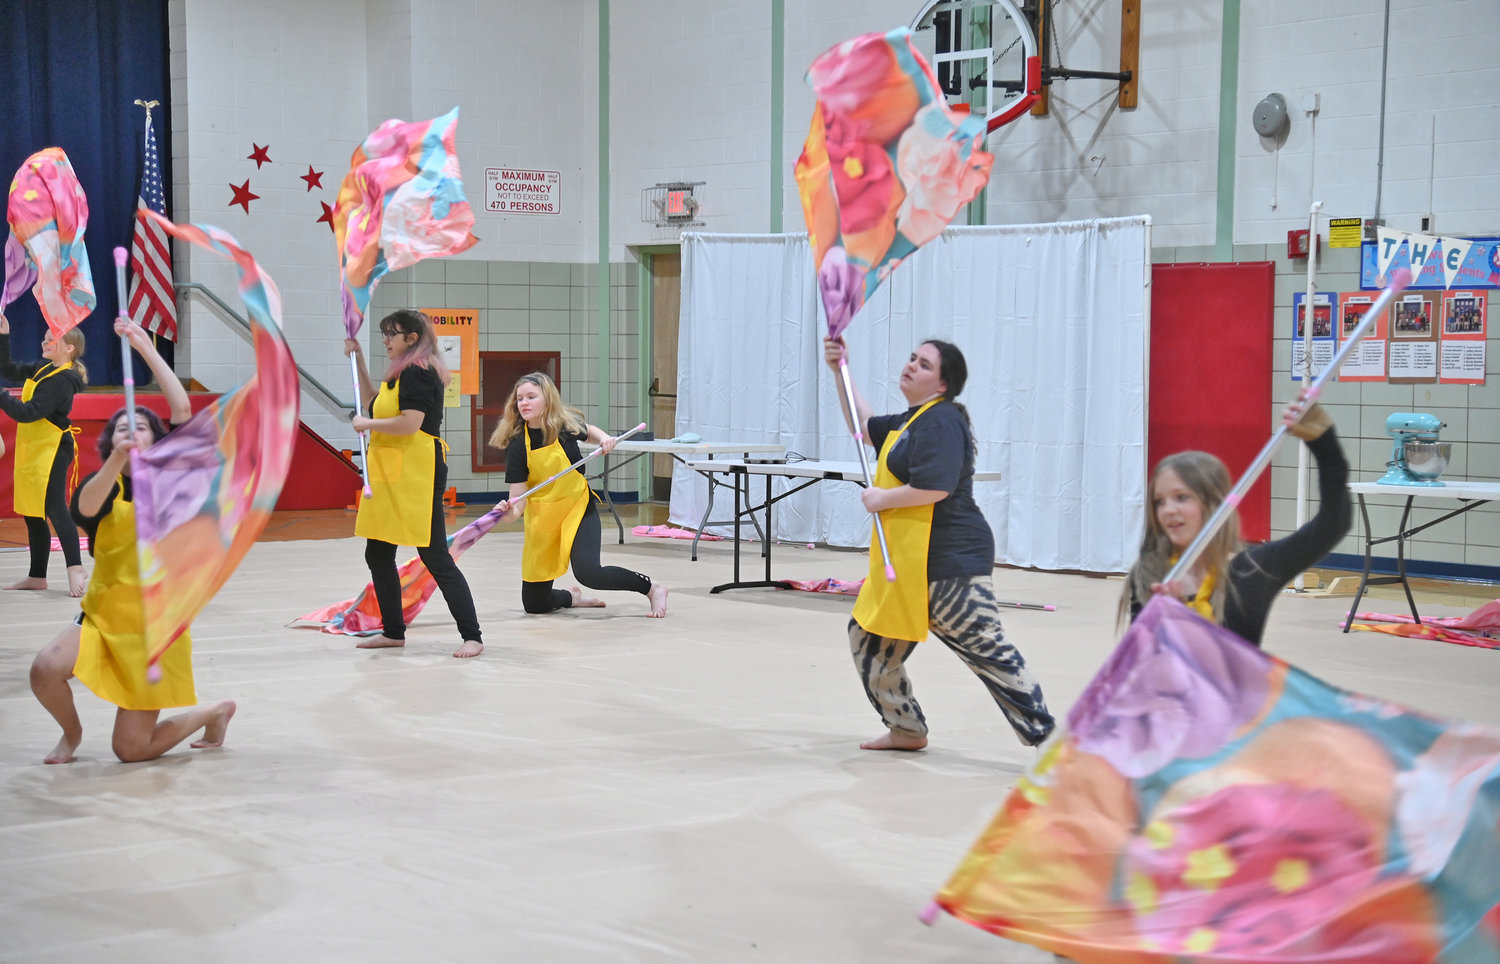 Members of the New Hartford JV Winter Guard go through the paces of their show called “Junior Bake-Off” about a baking competition. The guard members wear bright yellow aprons and spin brightly-colored flags, with cupcakes and rainbow sprinkles on them.